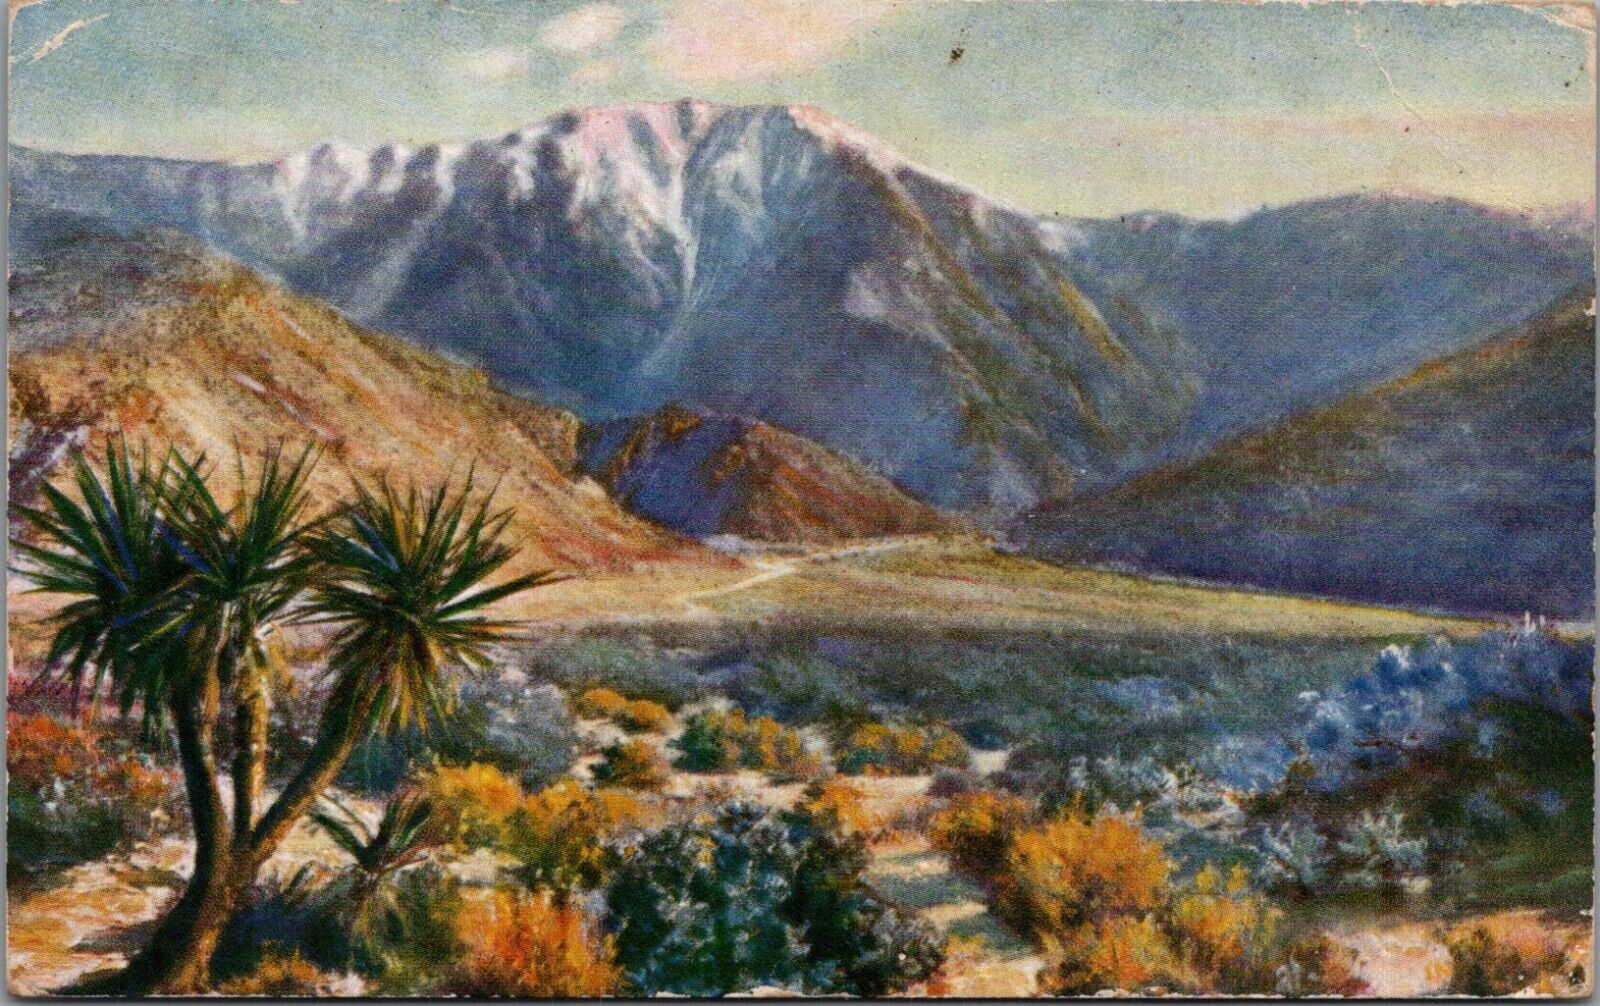 Mt Jacinto From Desert Side From Painting FB Standish California Postcard J164